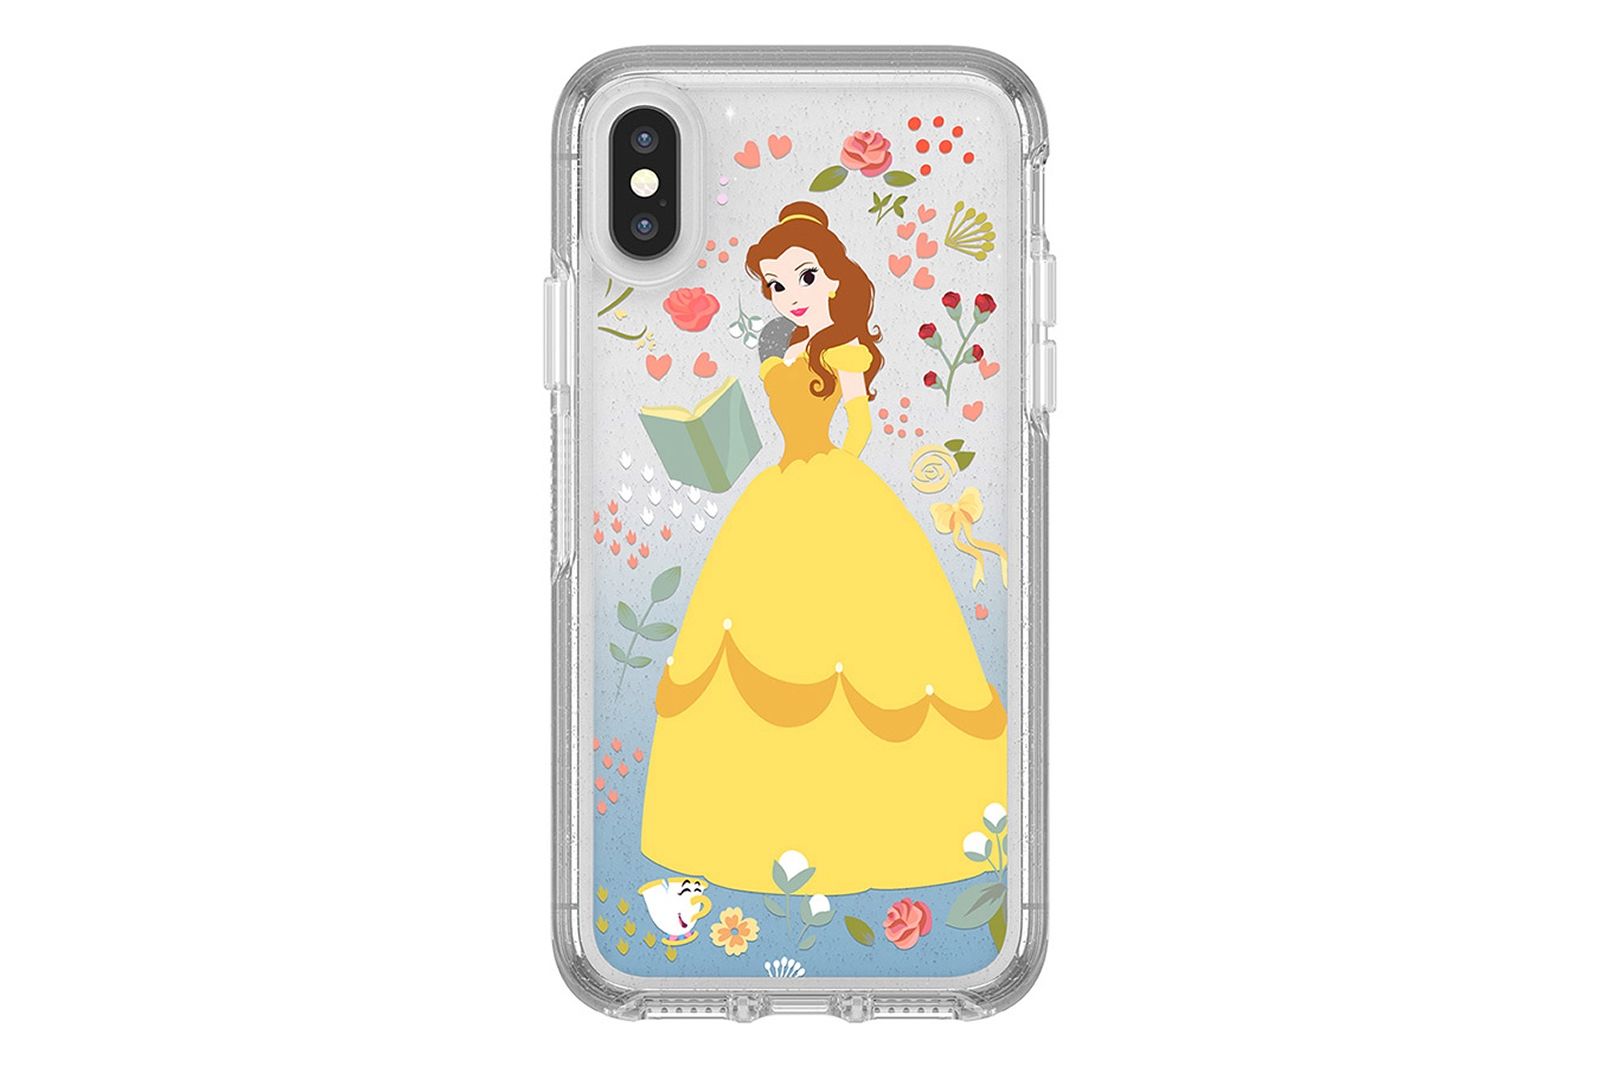 Best Disney Otterbox cases Protection fit for a Princess or a mouse image 5